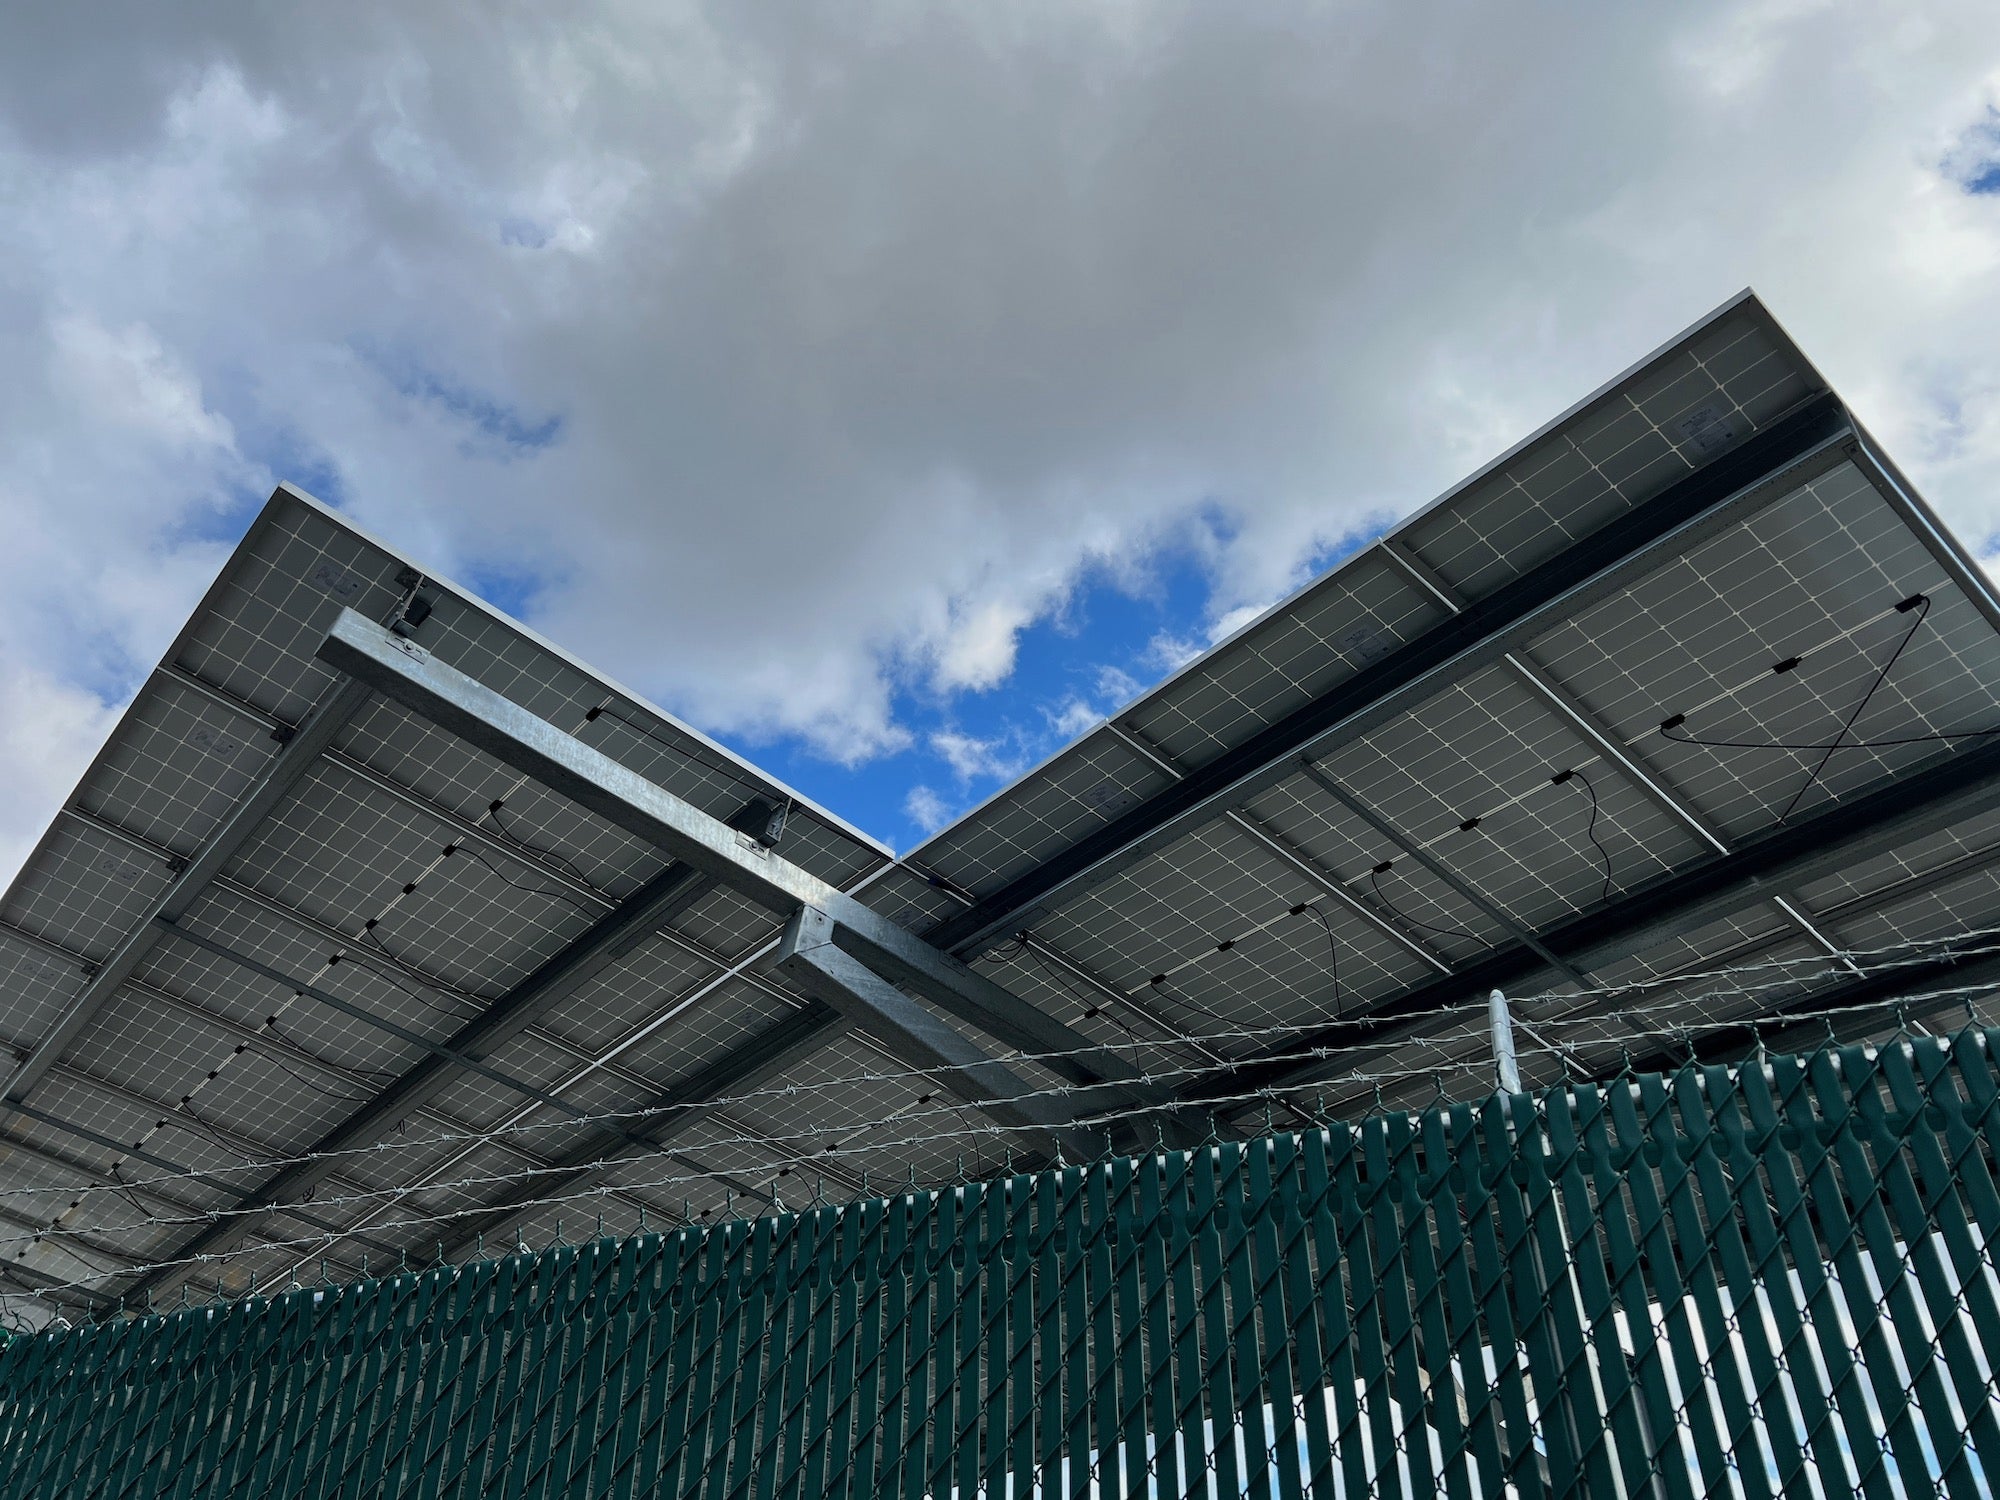 A very small amount of power can come from this solar canopy on site—a reminder that the cleanest energy comes from renewable sources.